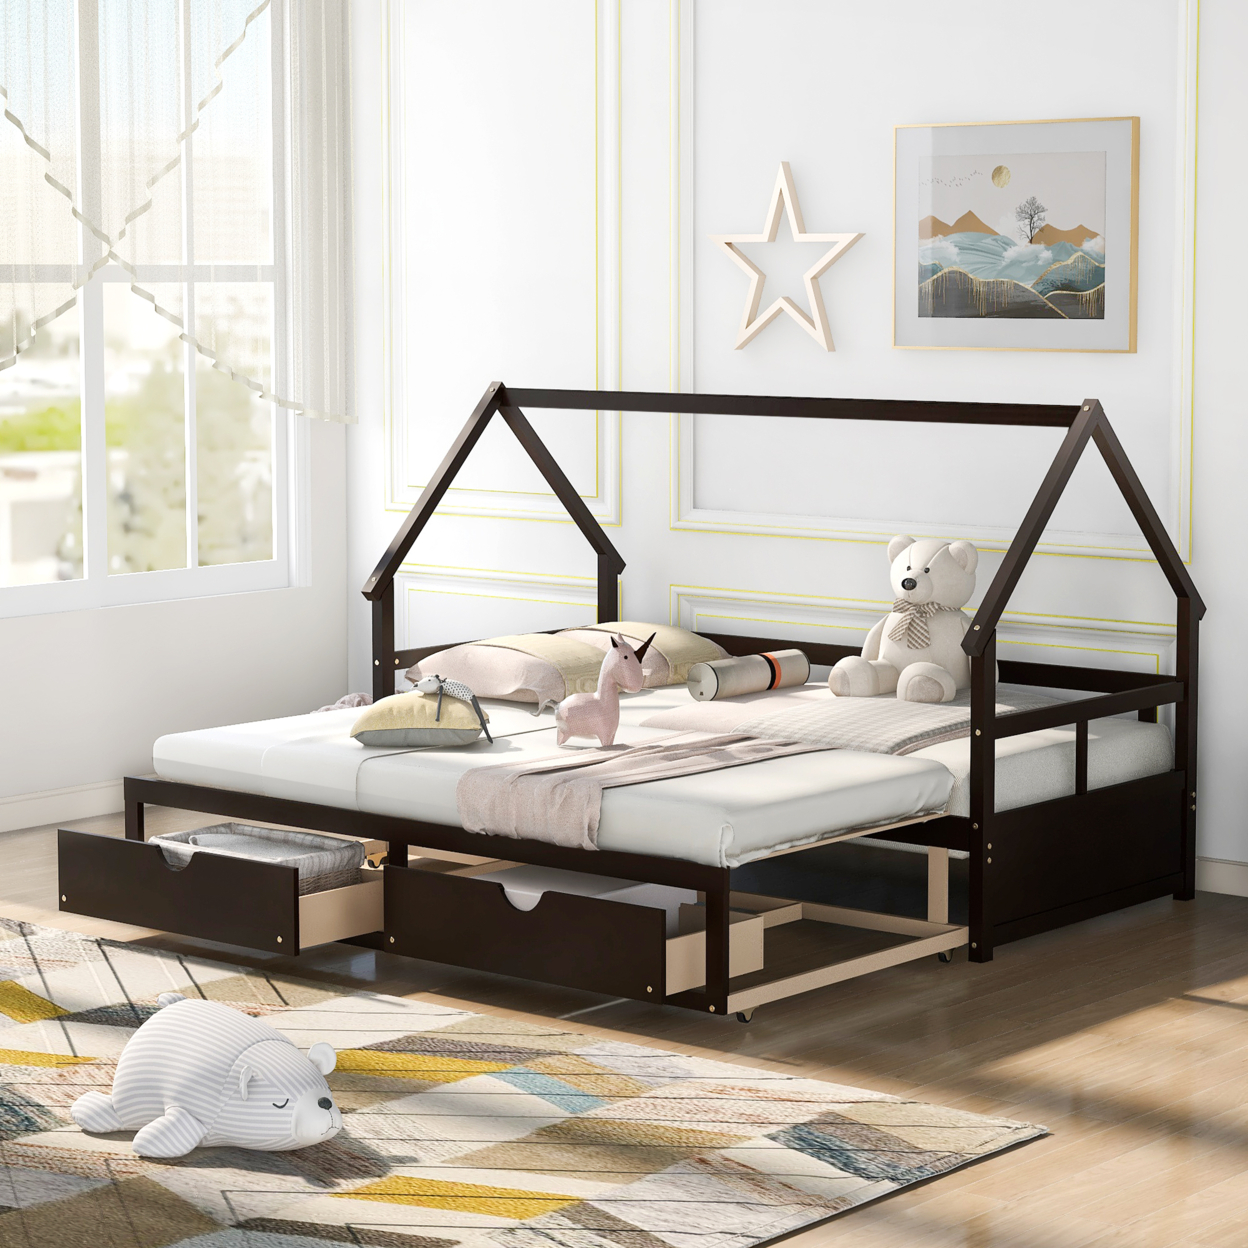 Extending Wooden Daybed with Two Drawers, Espresso